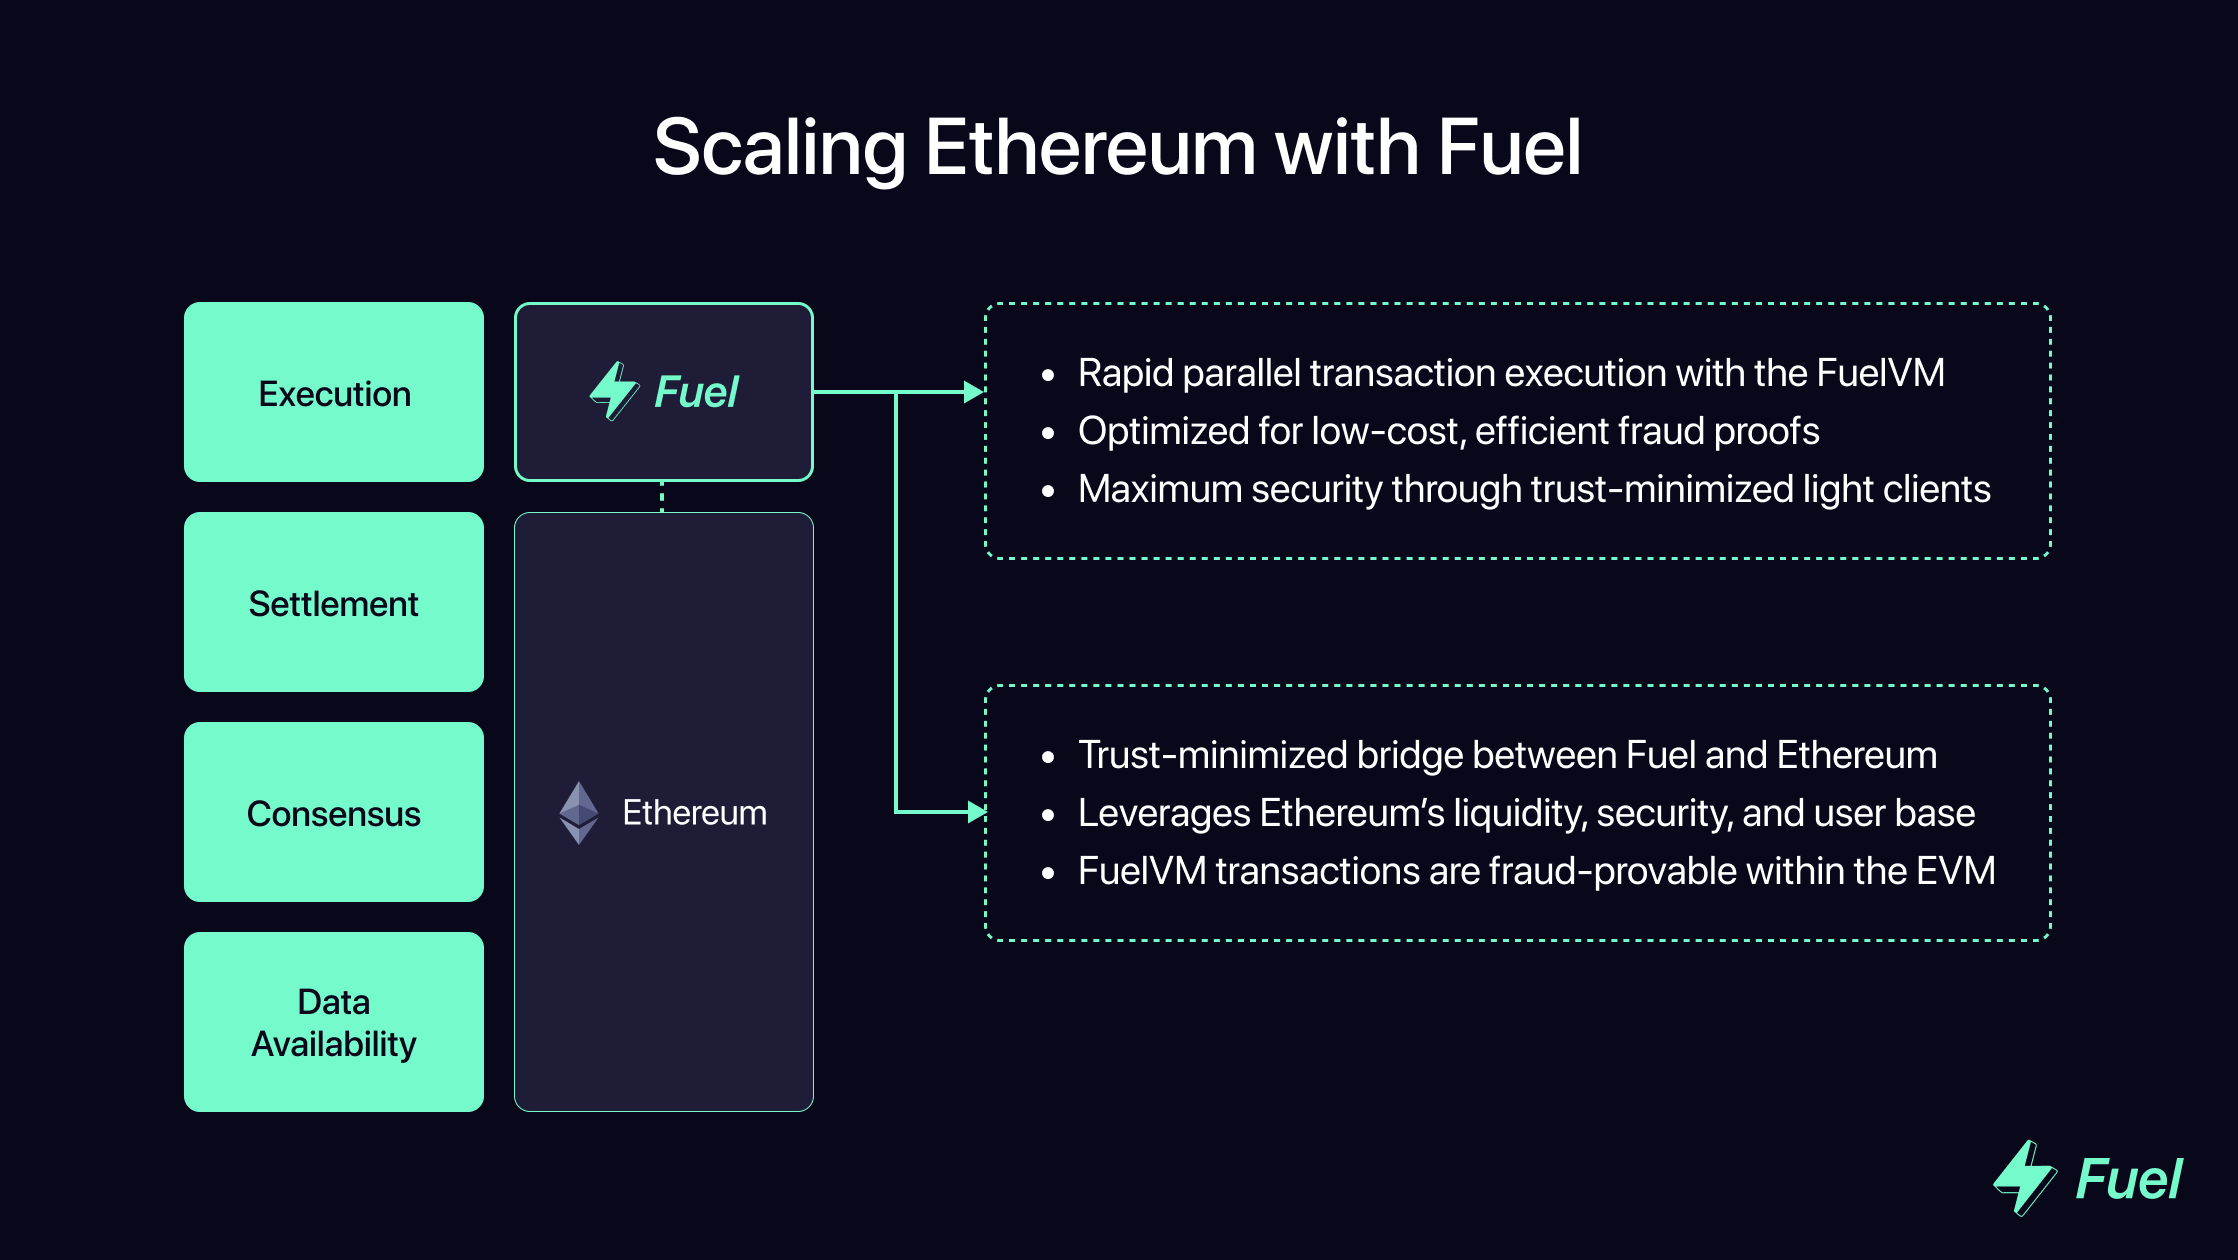 Scaling Ethereum with Fuel